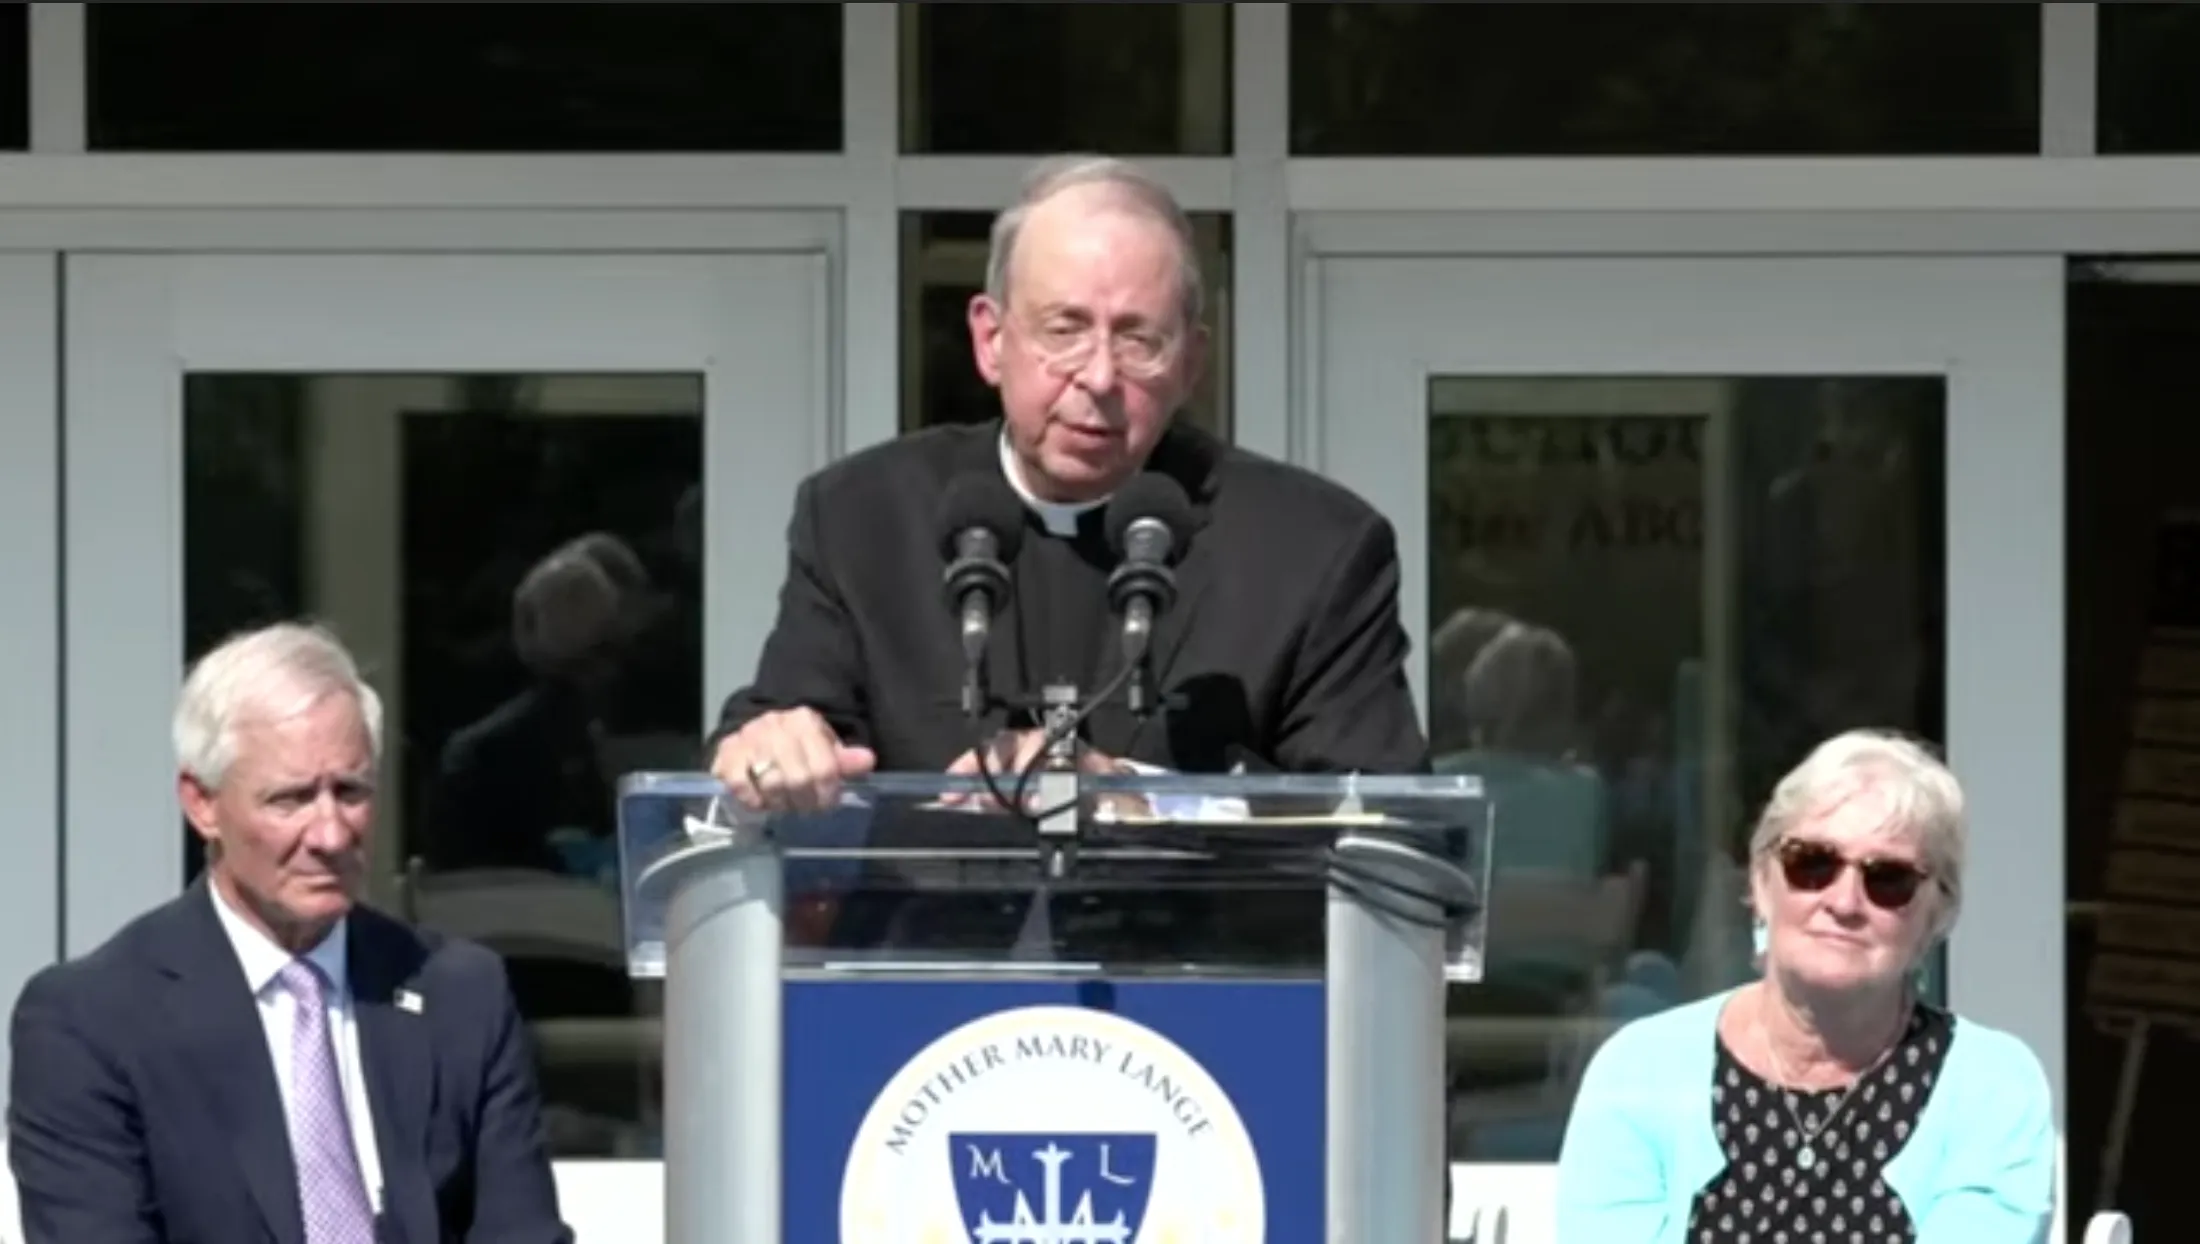 Archbishop William Lori of Baltimore speaks at the grand opening and blessing ceremony of Mother Mary Lange Catholic School in Baltimore, Md., Aug 6, 2021.?w=200&h=150